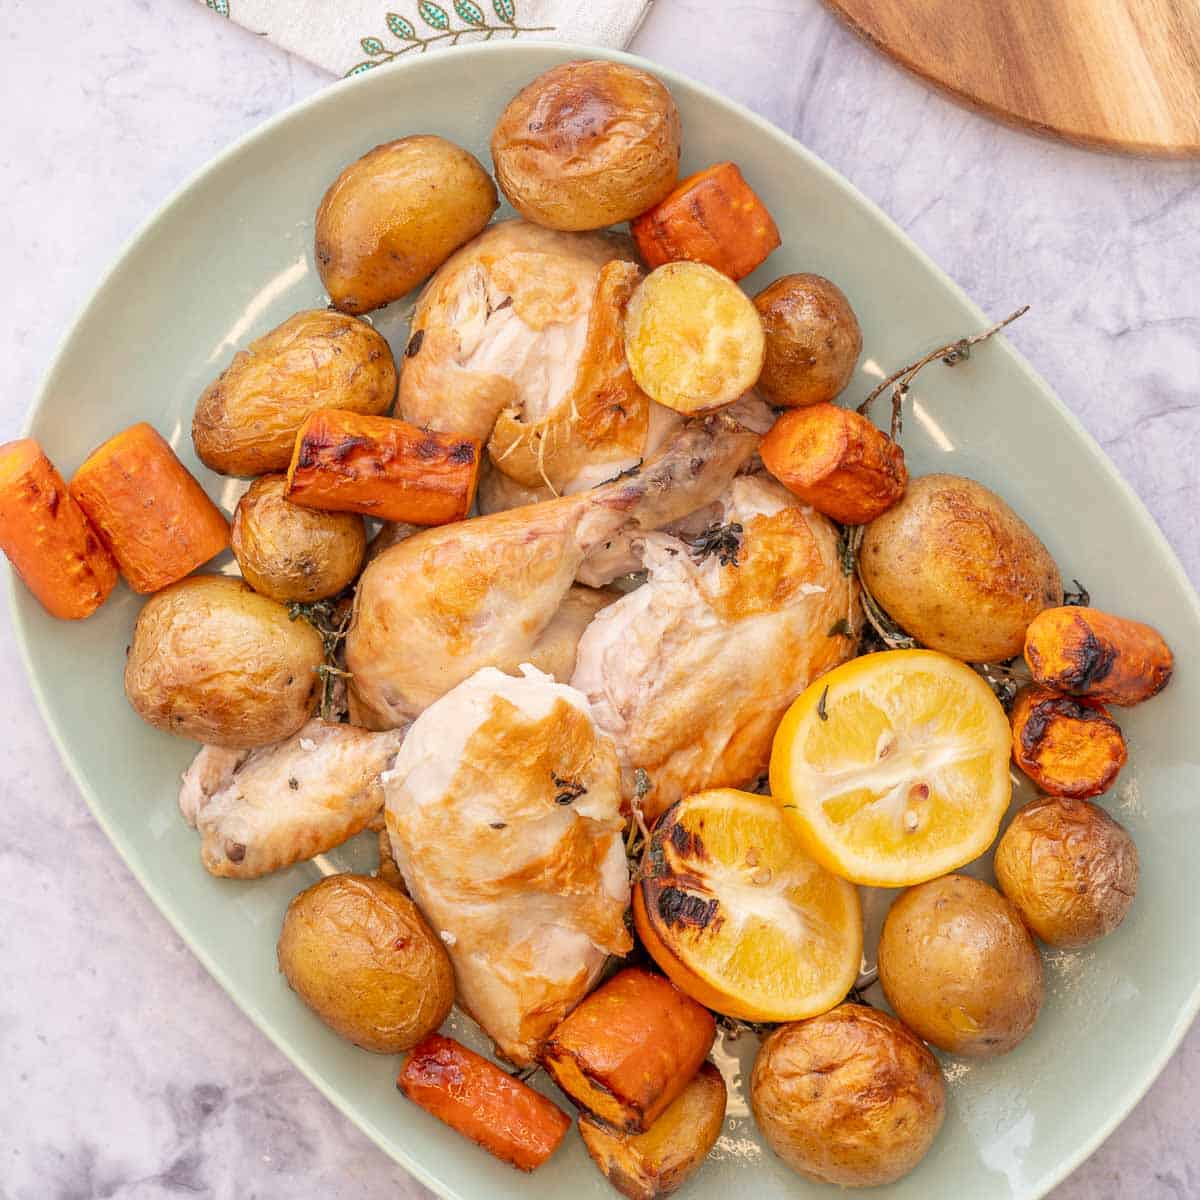 A large mint green serving dish filled with roasted potatoes, carrots and chicken sitting on the bench in front of the crockpot 